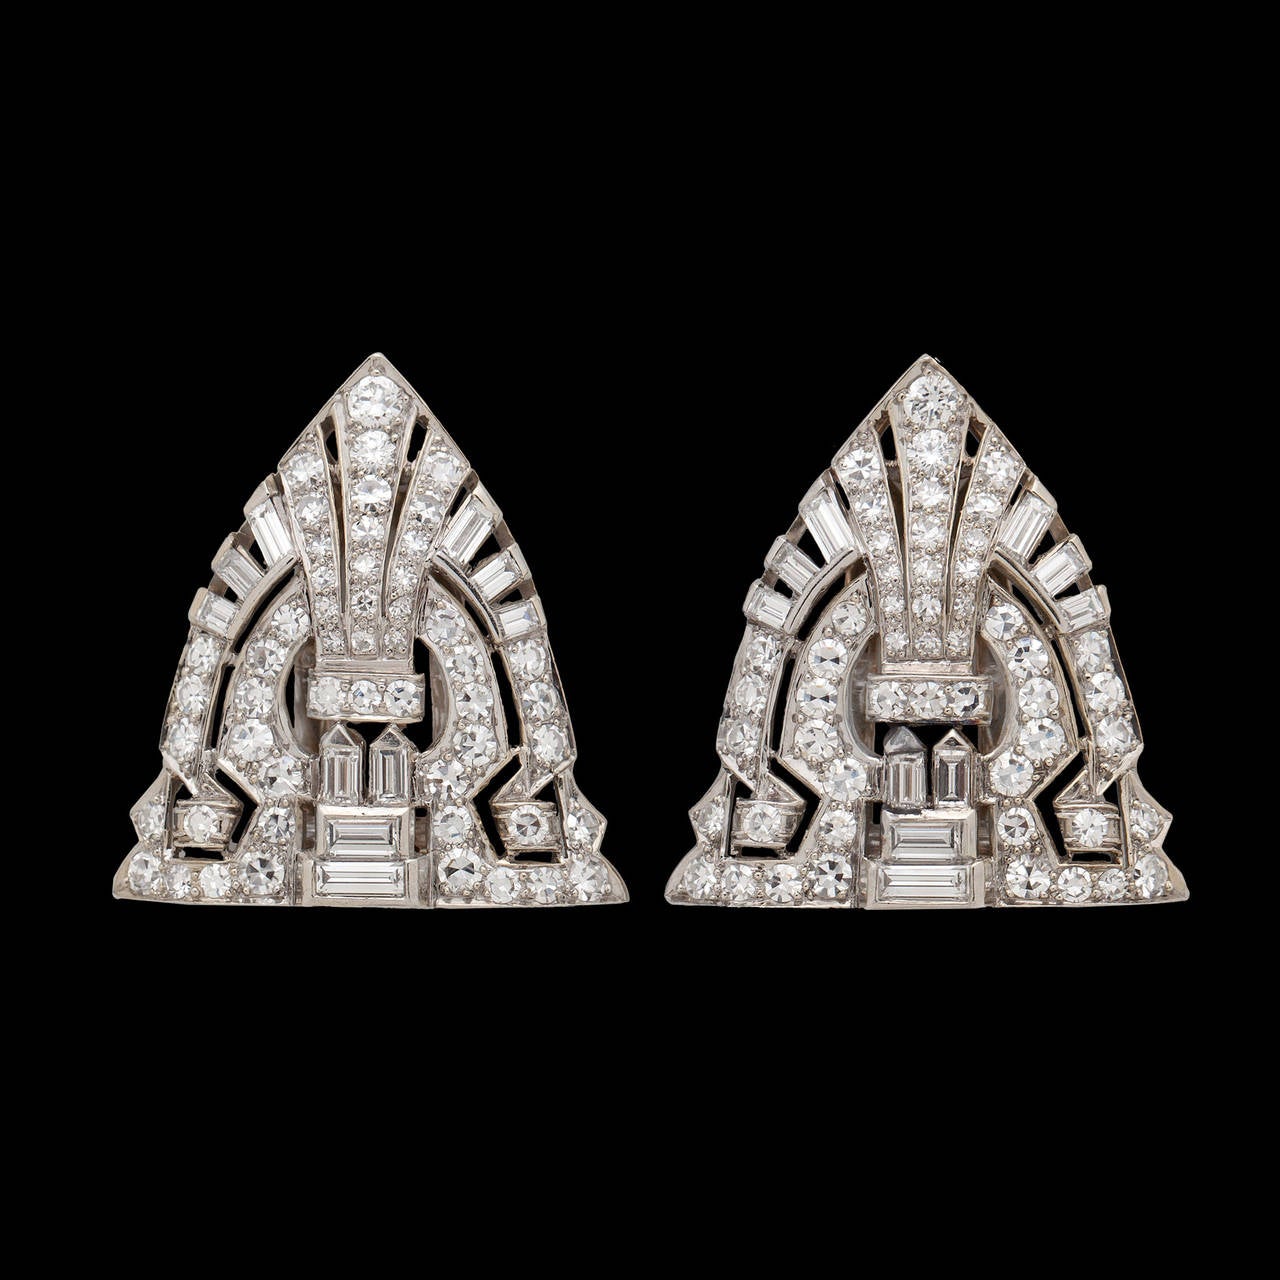 A Pair of Beautifully Crafted Clip Brooches Featuring 3.50cts of Single Cut, Baguette and Tapered Baguette Diamonds Set in 14Kt White Gold. The clips measure 26.5mm by 24.5mm and total 12.4 grams.